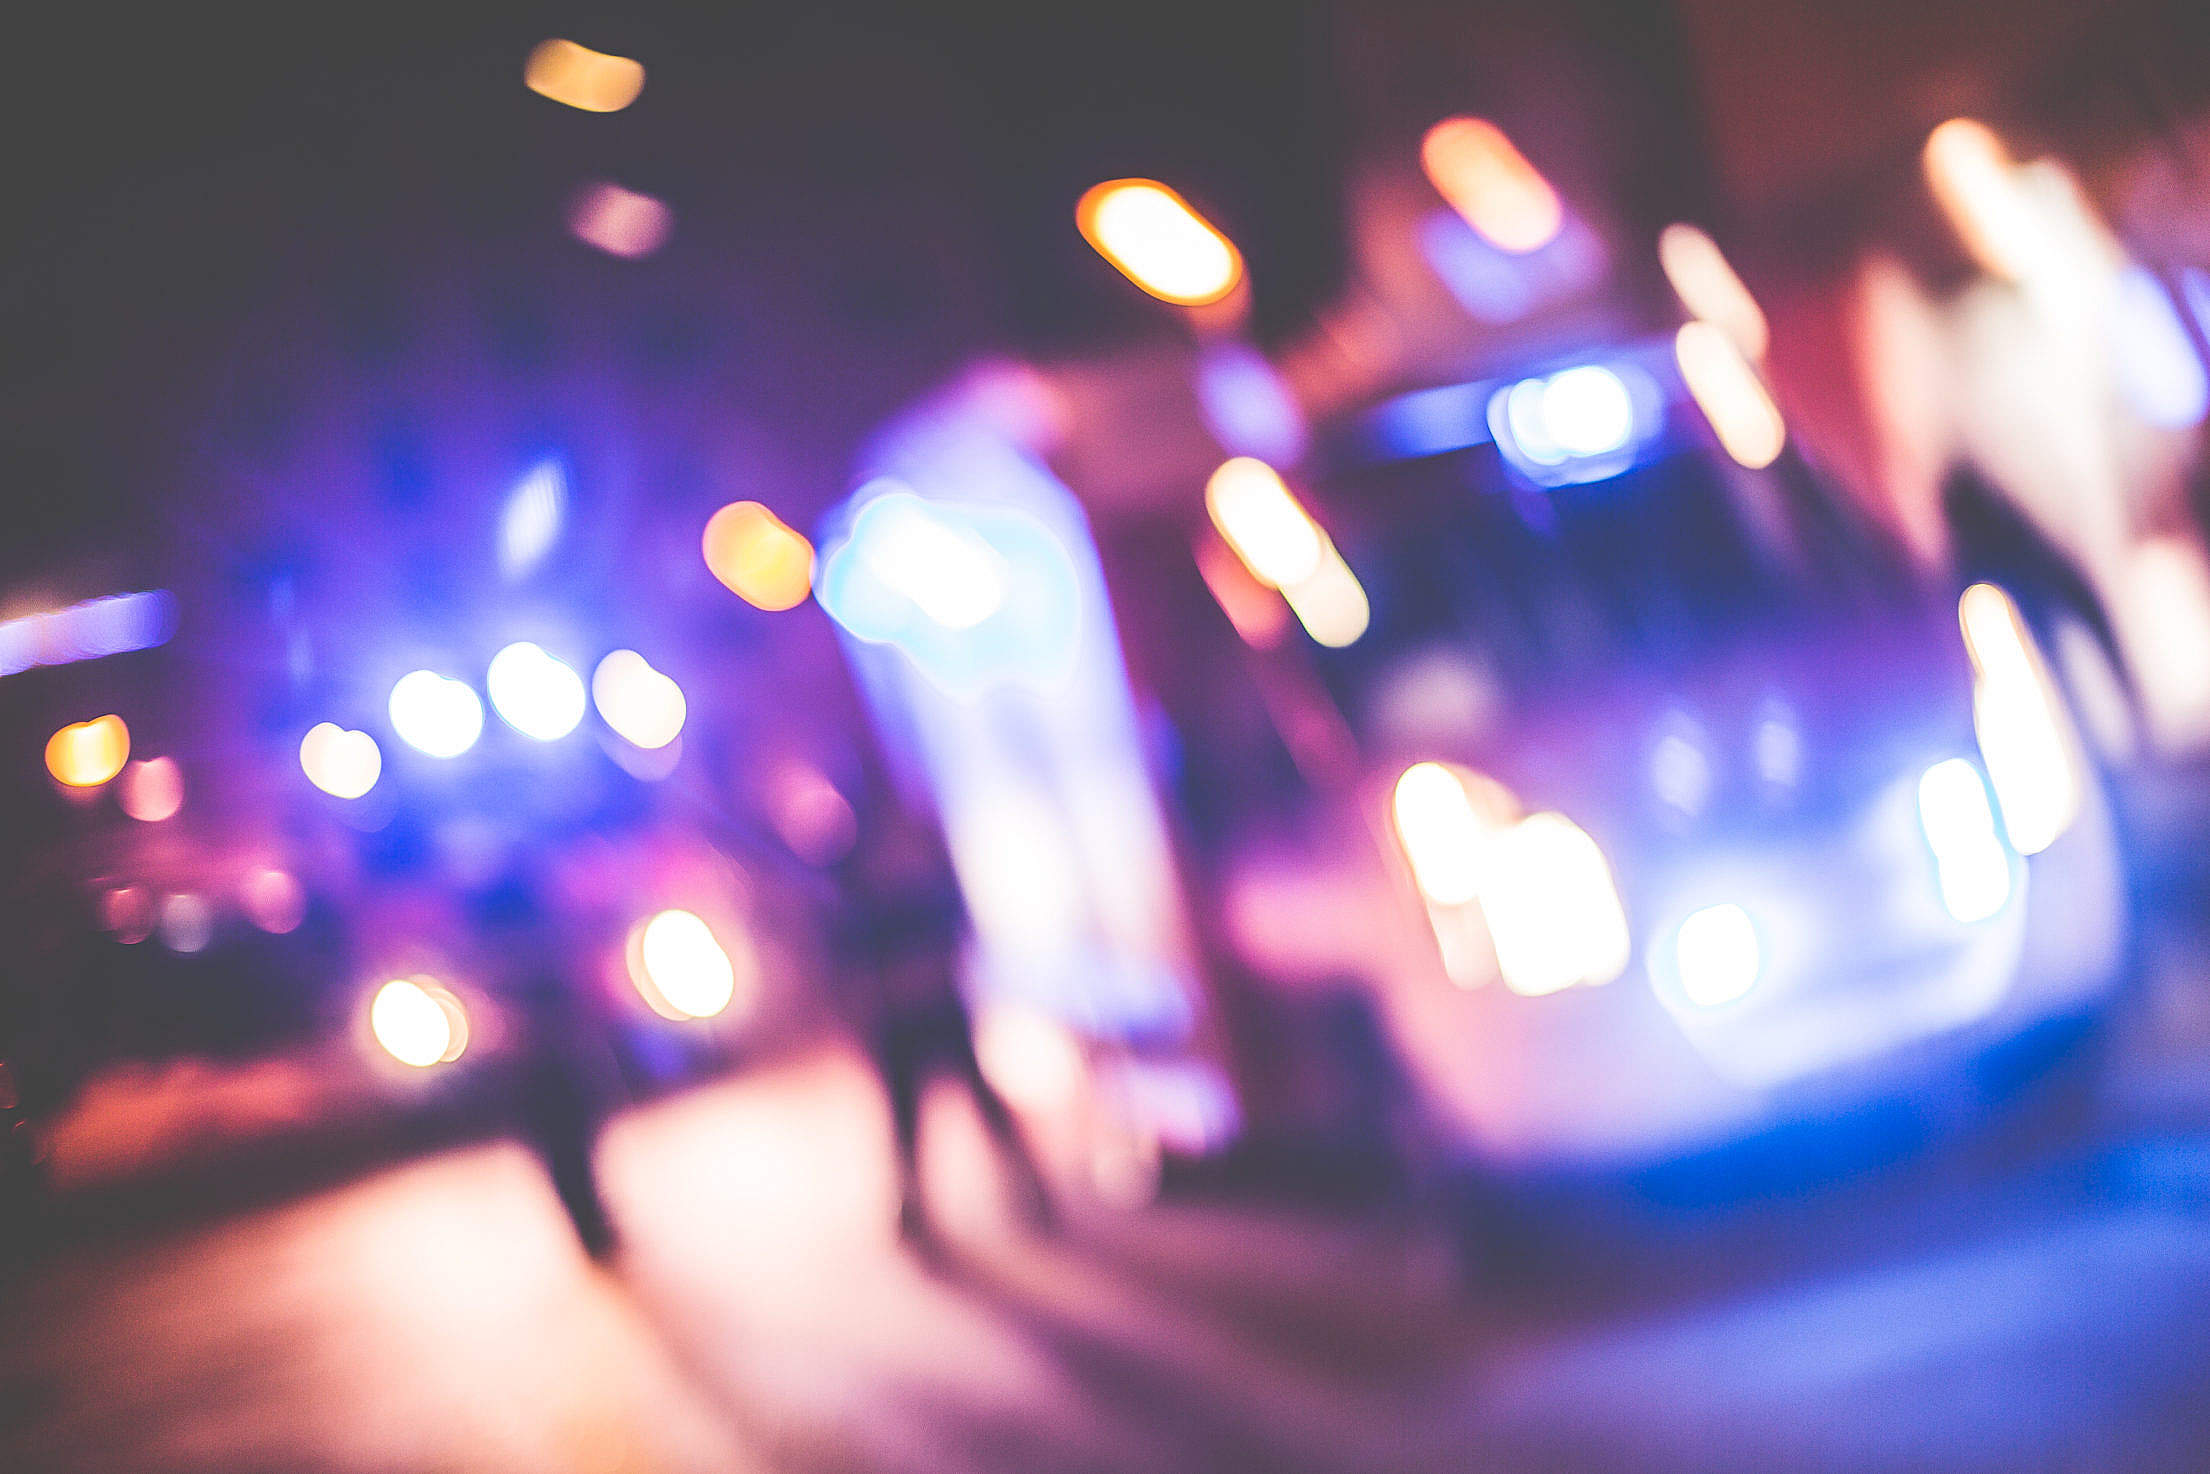 Blurred Emergency Cars At Night Free Stock Photo